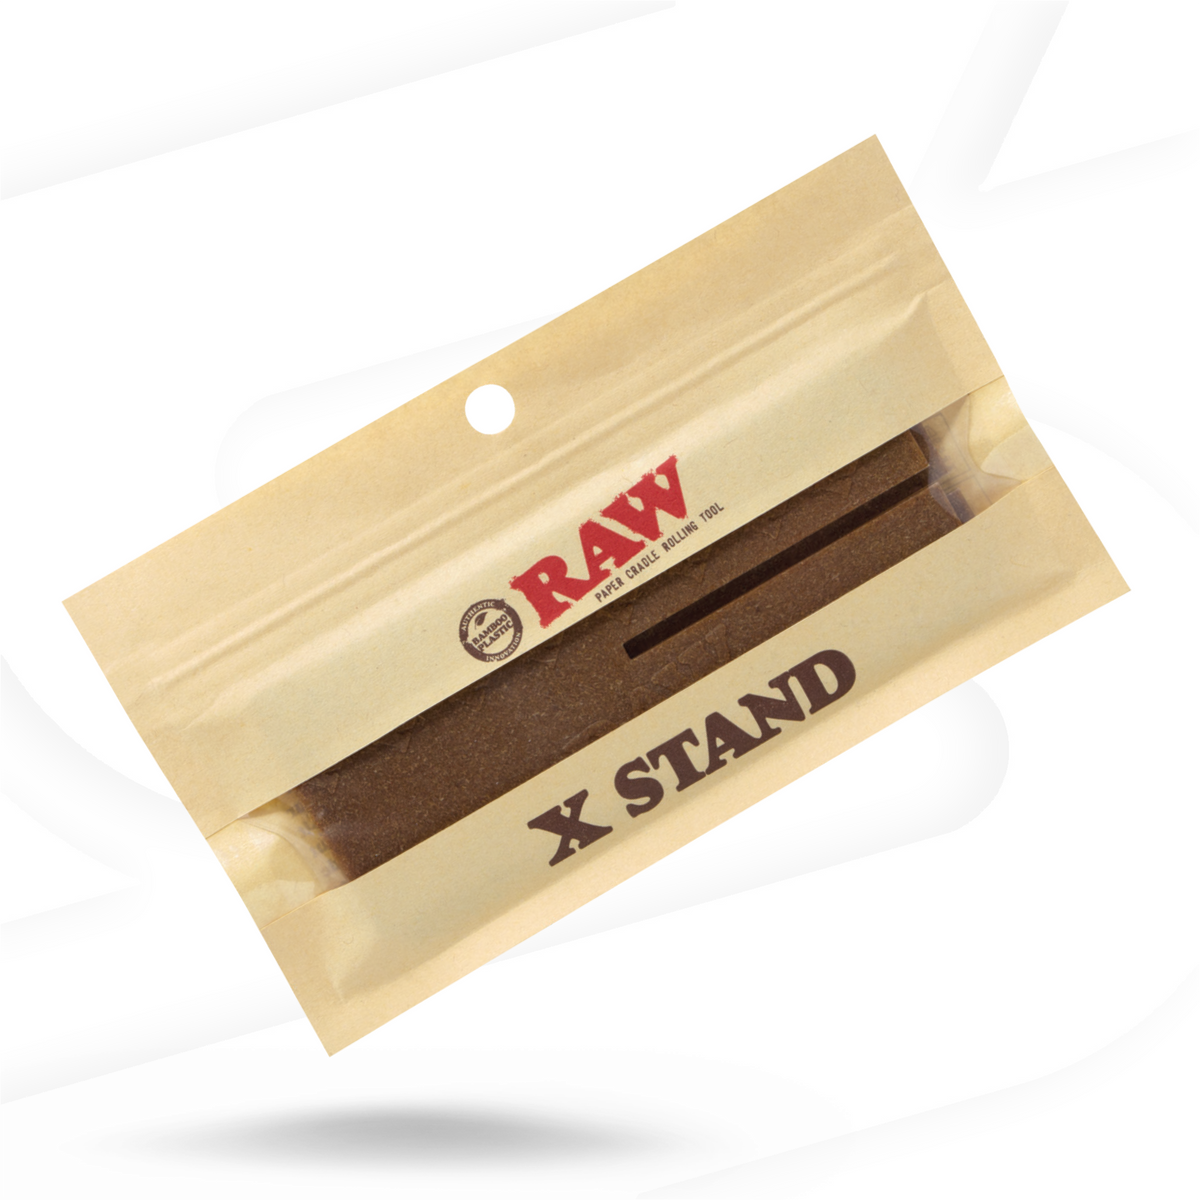 RAW X Stand Accessories RAWU-RAAA-0009 esd-official